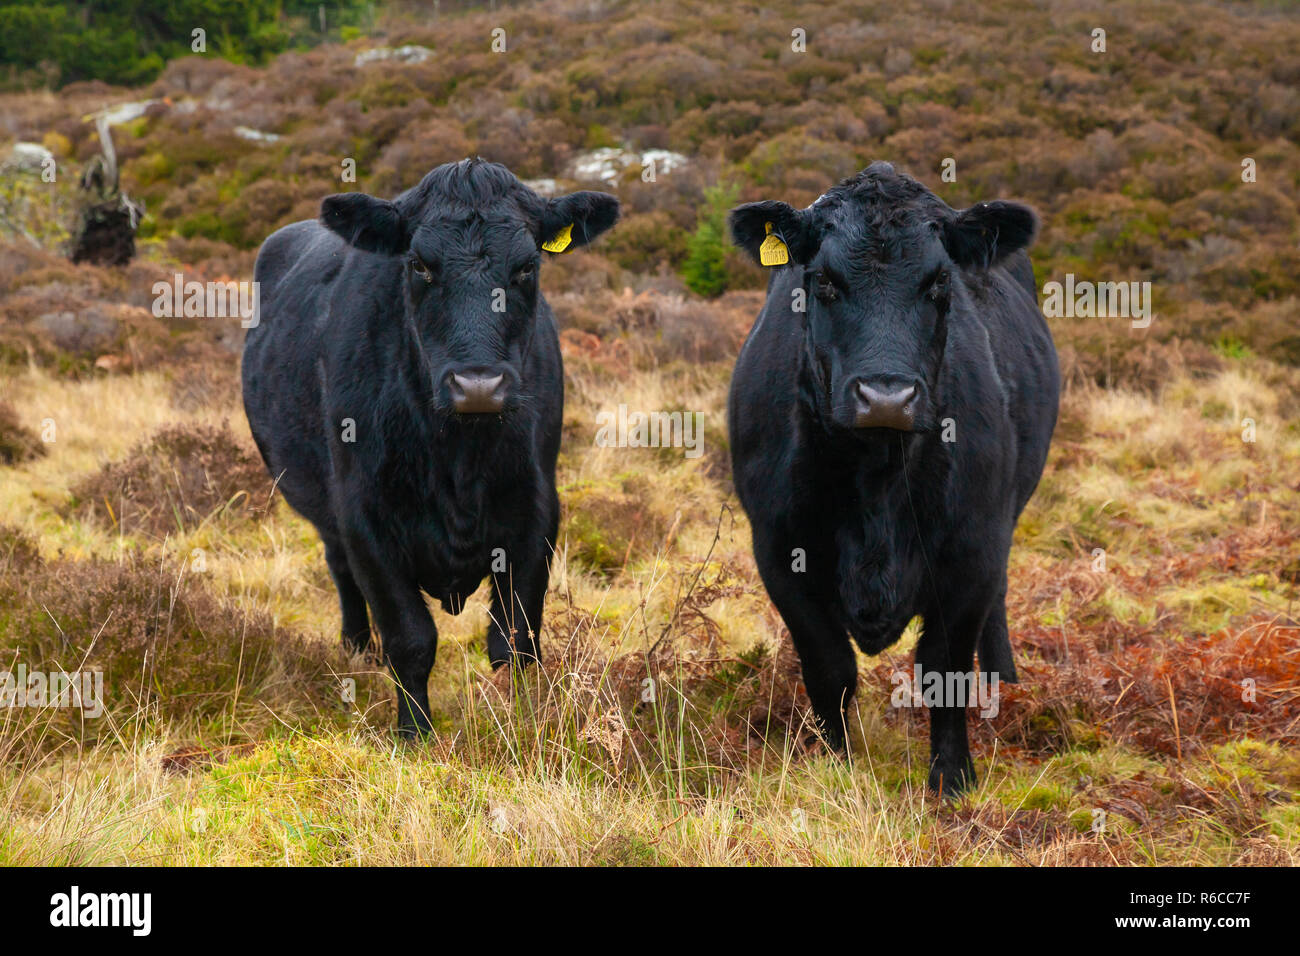 Two black cows standing side by side looking towards camera, Scotland. Stock Photo